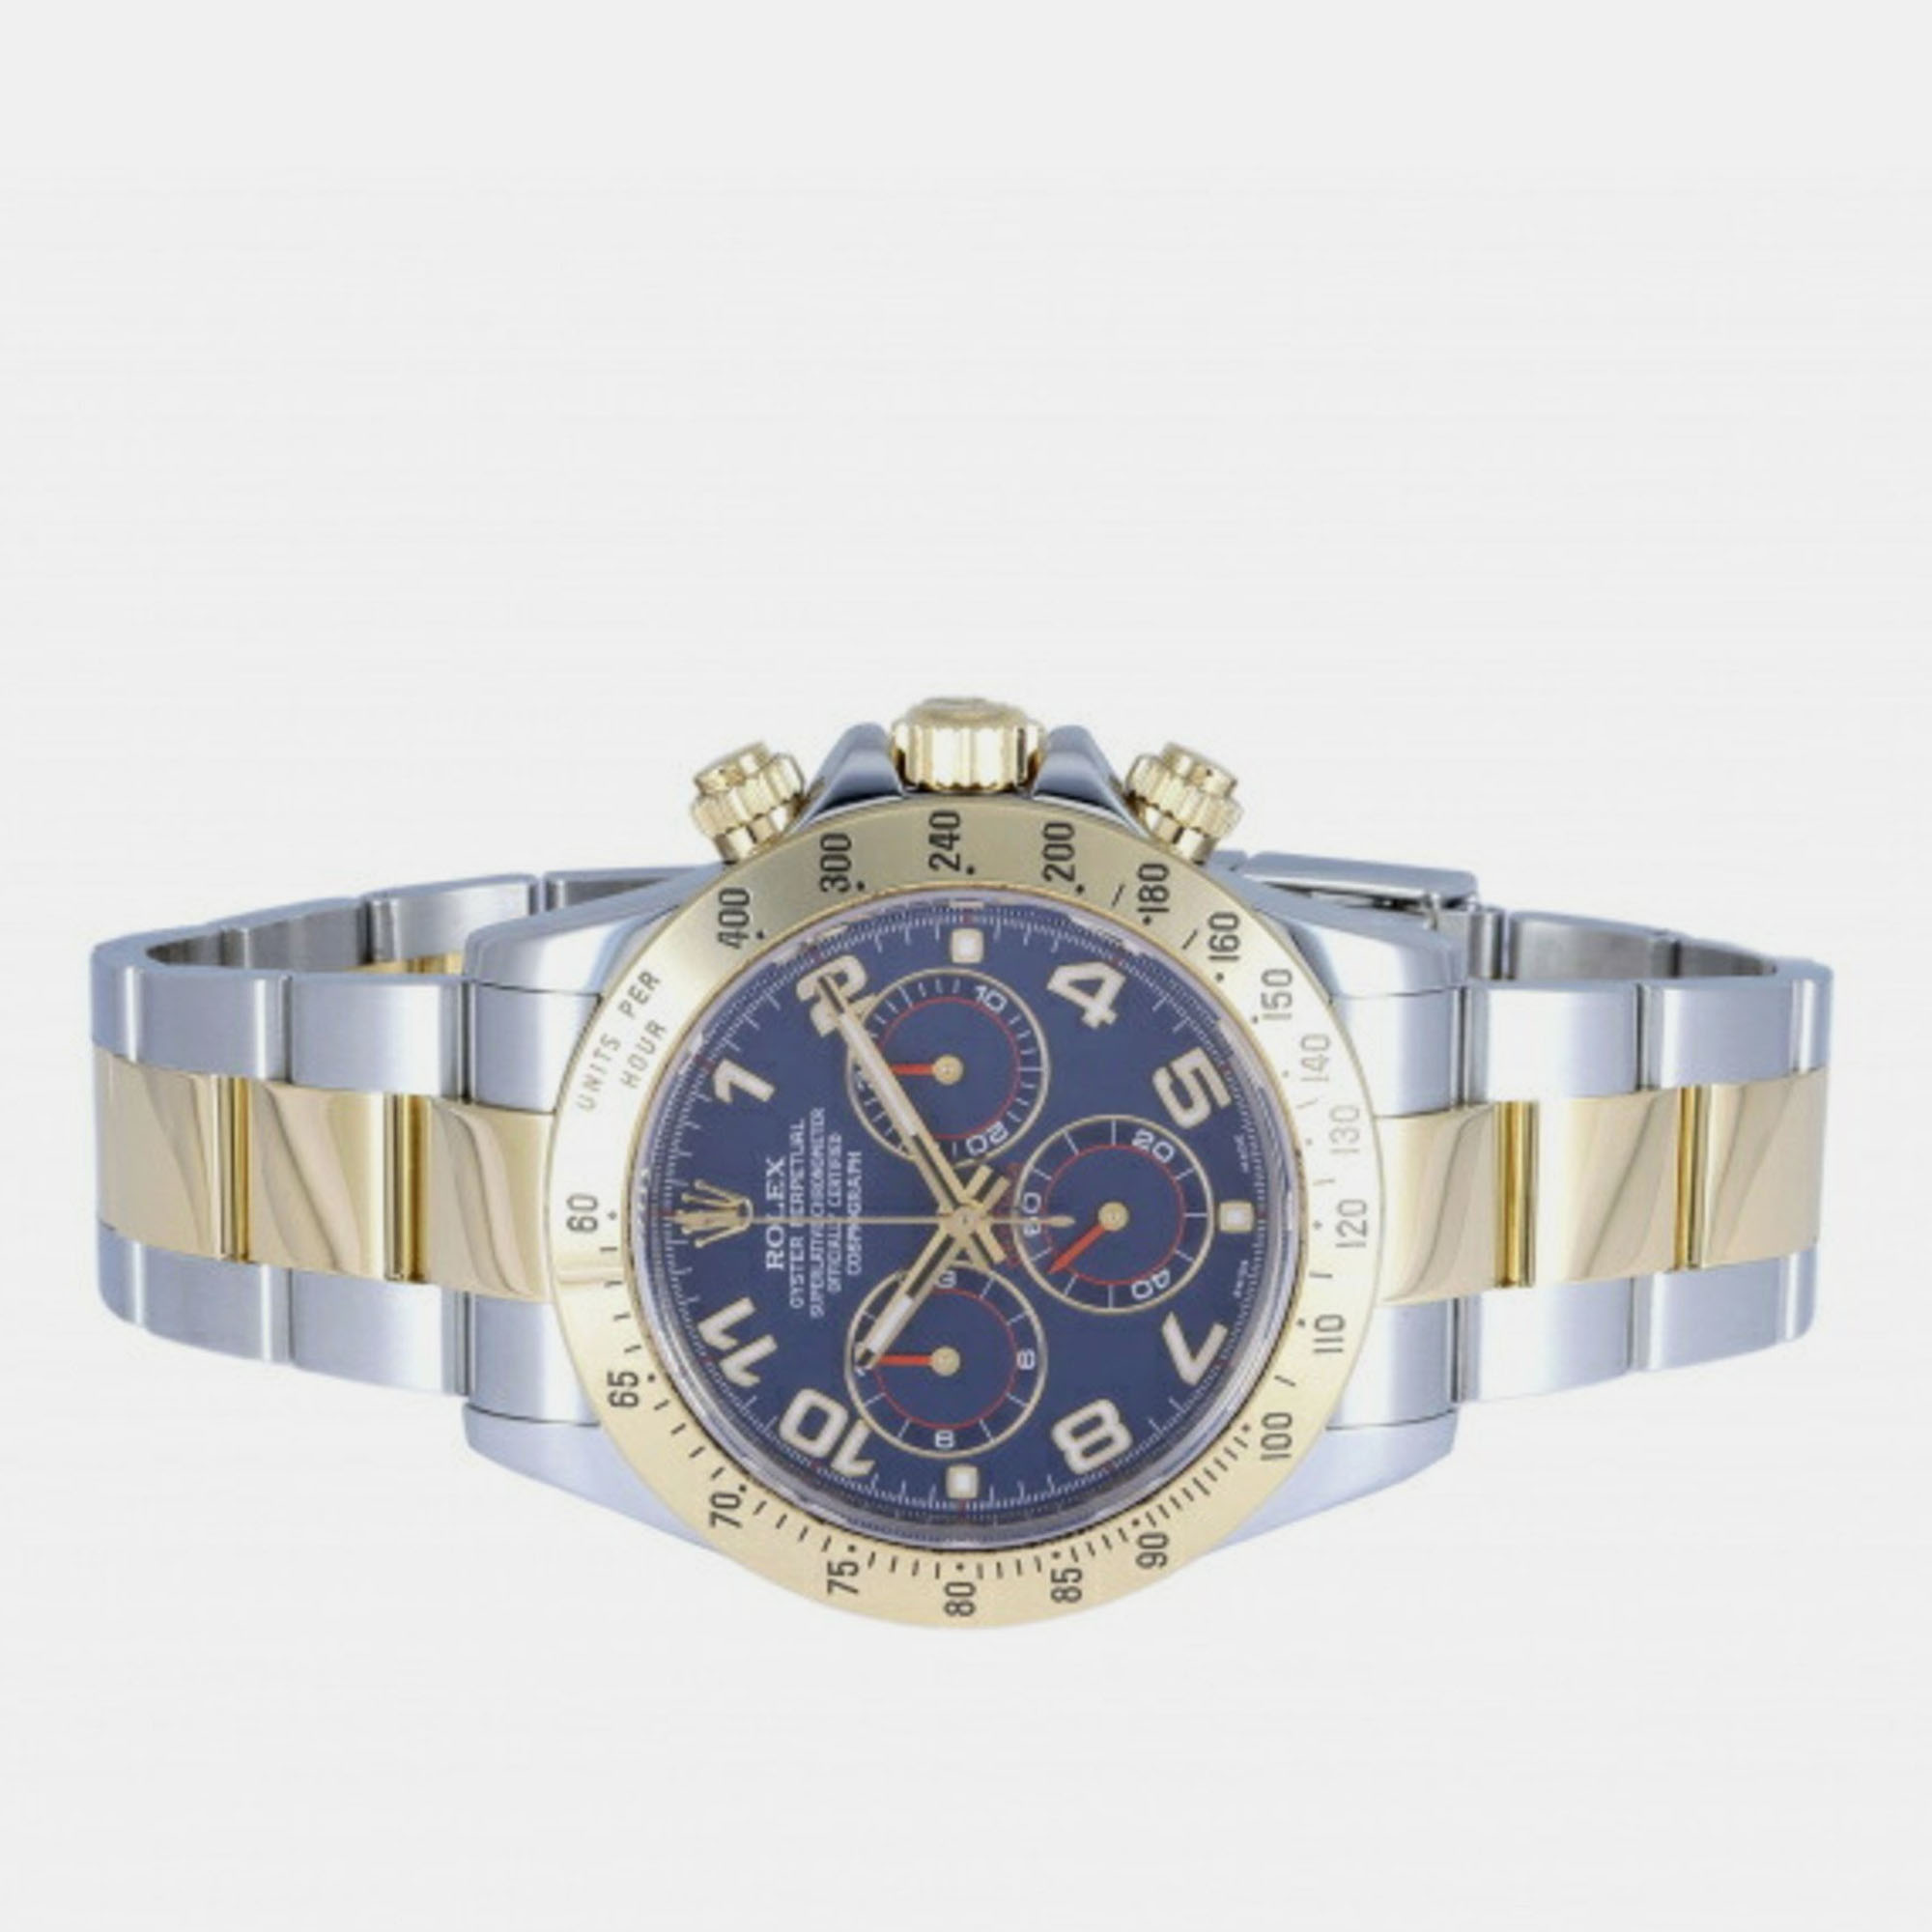 

Rolex Blue 18k Yellow Gold And Stainless Steel Cosmograph Daytona 116523 Automatic Men's Wristwatch 40 mm